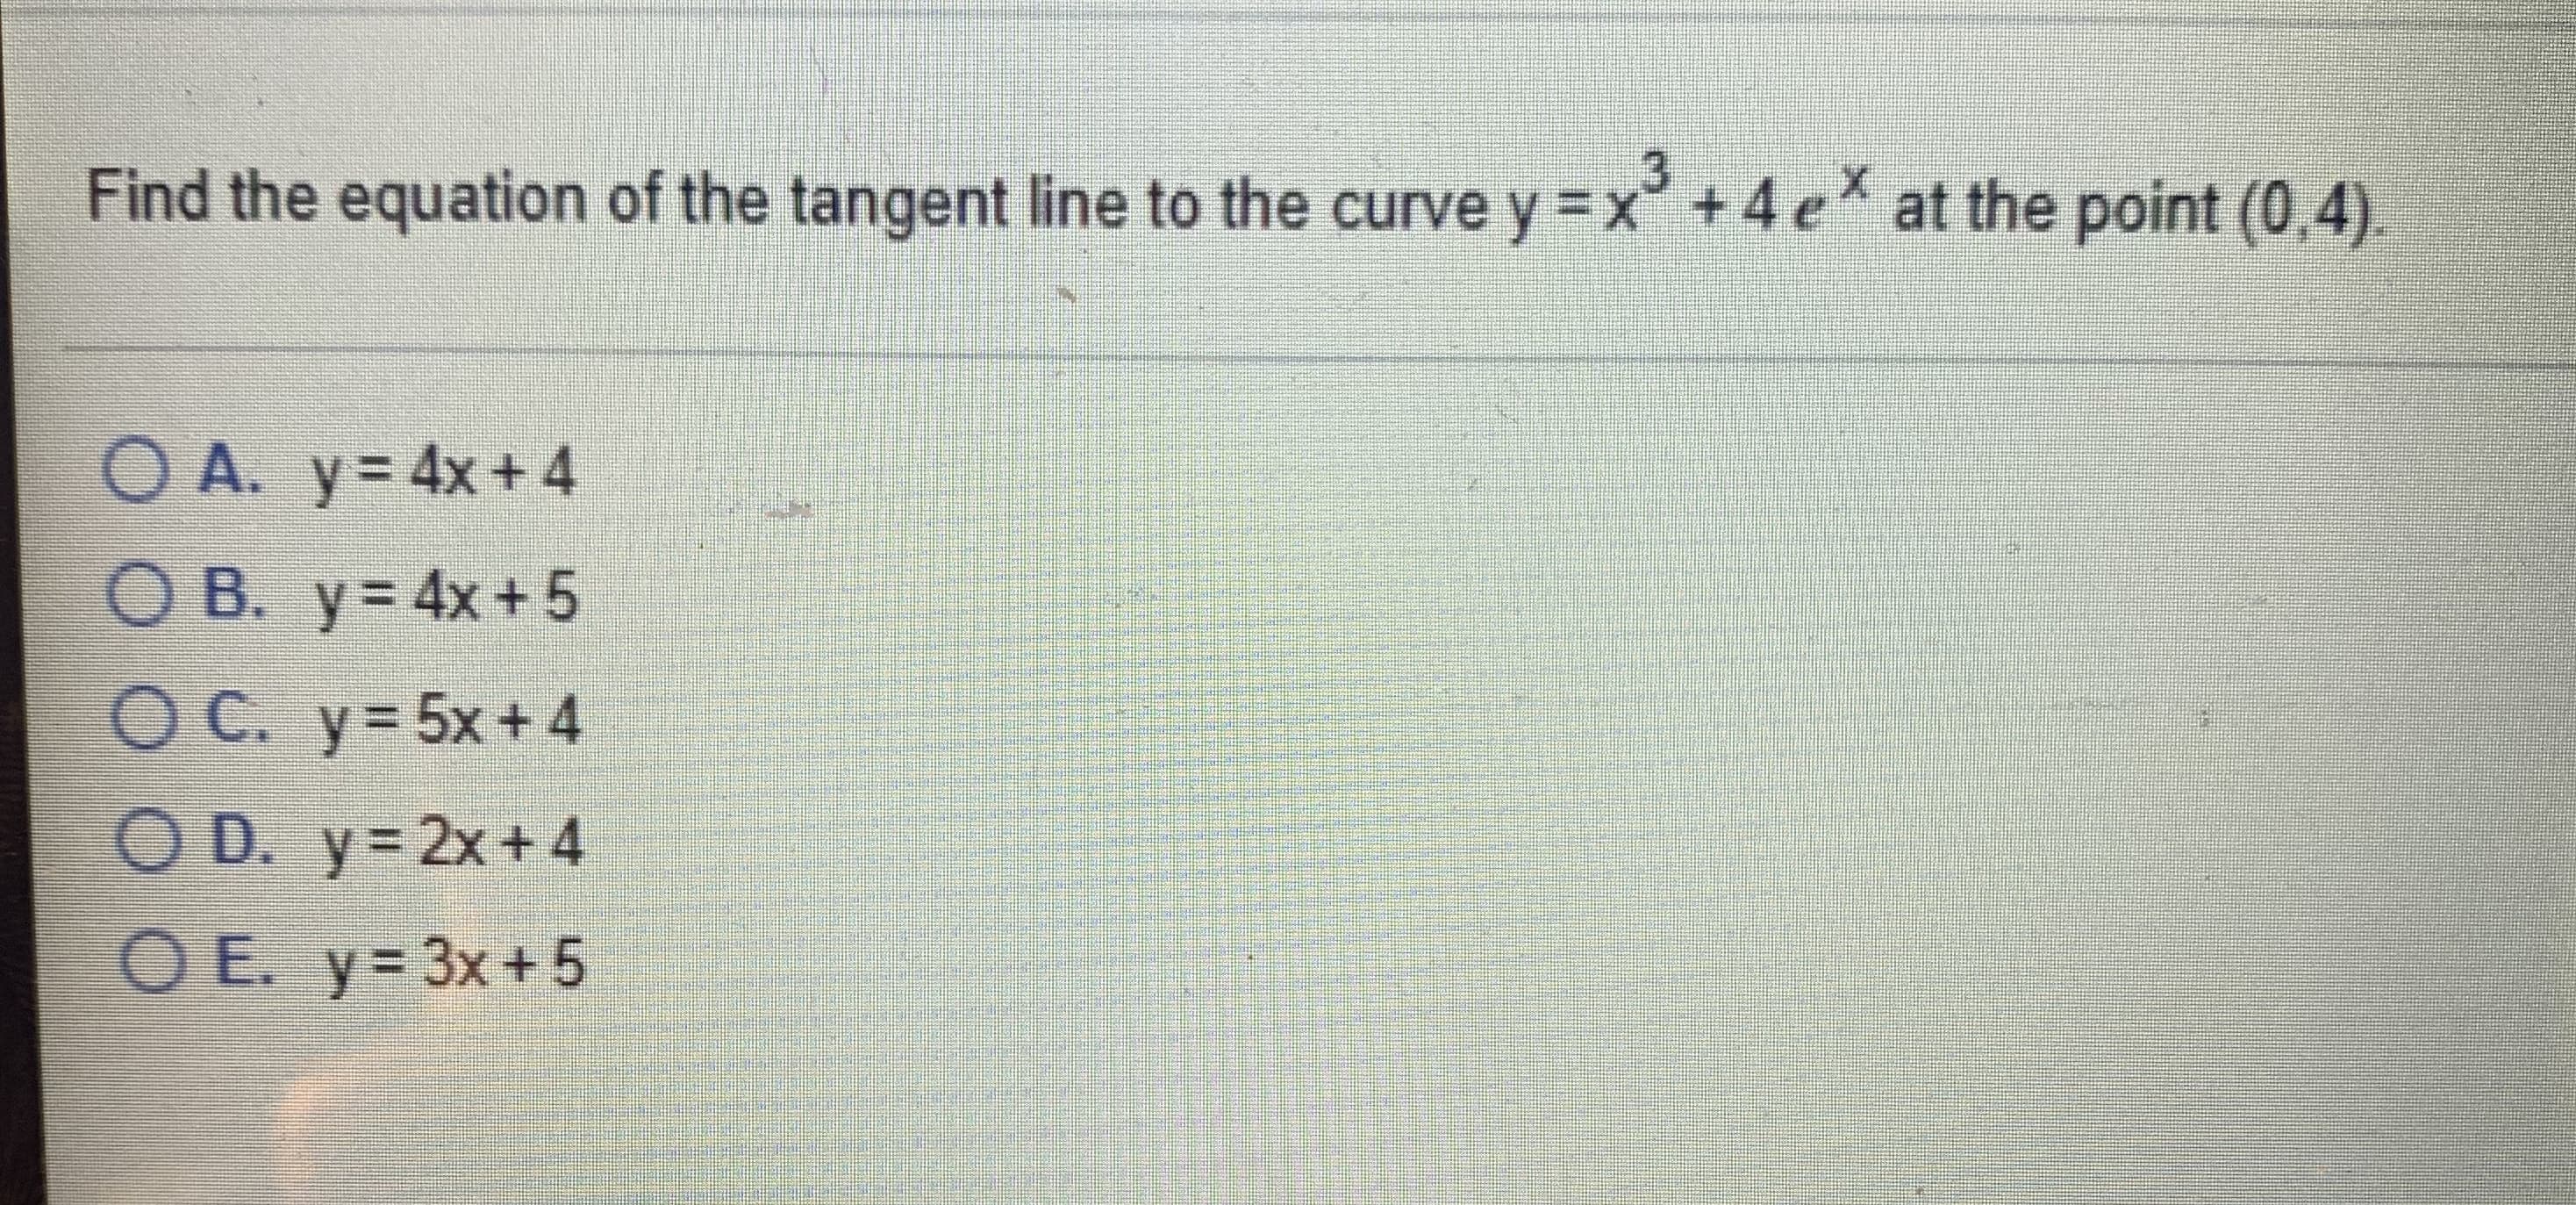 Find the equation of the tangent line to the curve y =x° +4 e
at the point (0,4).
O A. y= 4x+4
O B. y= 4x+ 5
OC. y=5x+4
O D. y= 2x+4
OE. y= 3x+5
